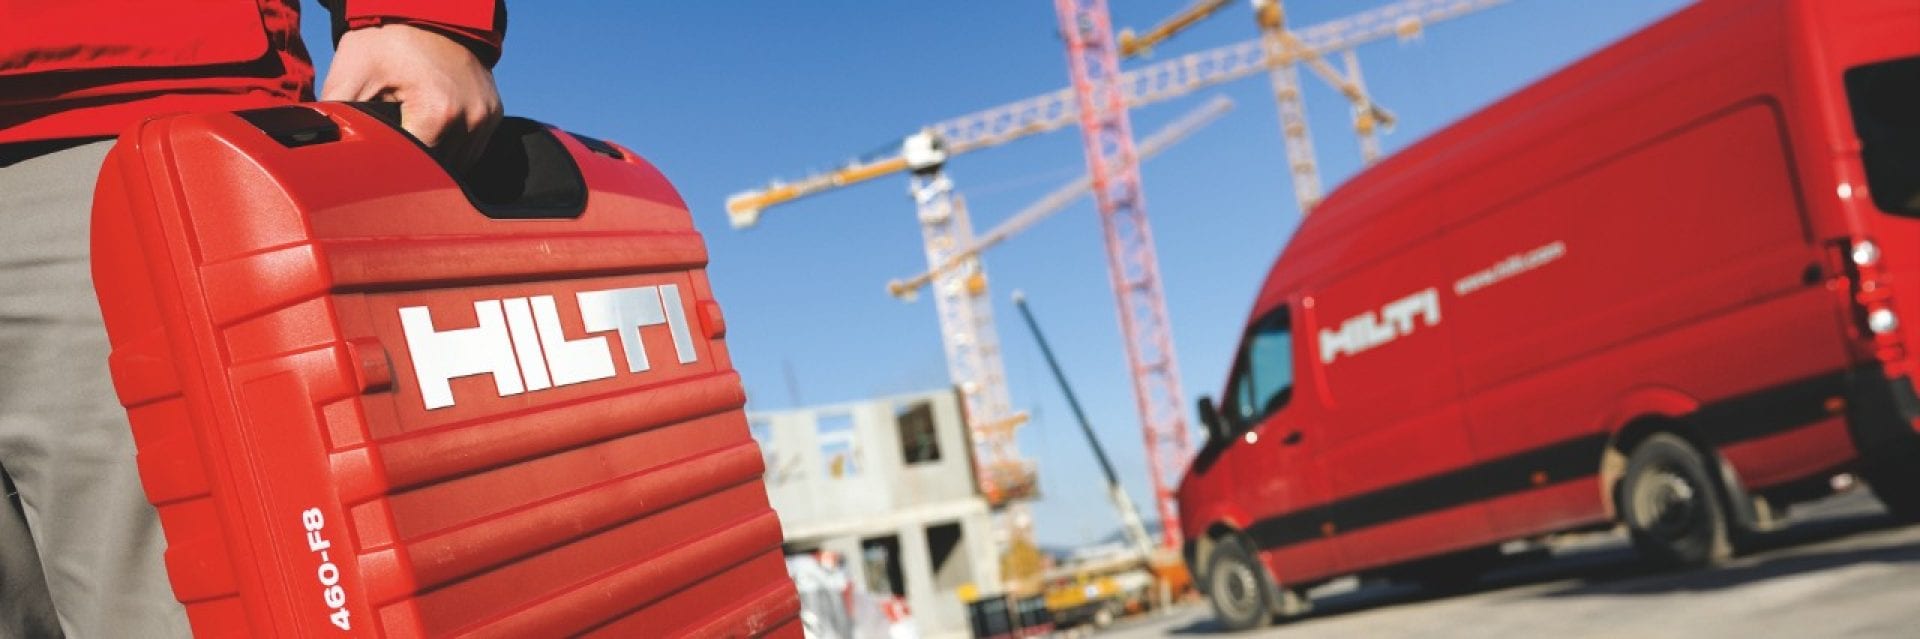 International Management - Guest Lecture with Hilti: How to implement a  corporate strategy